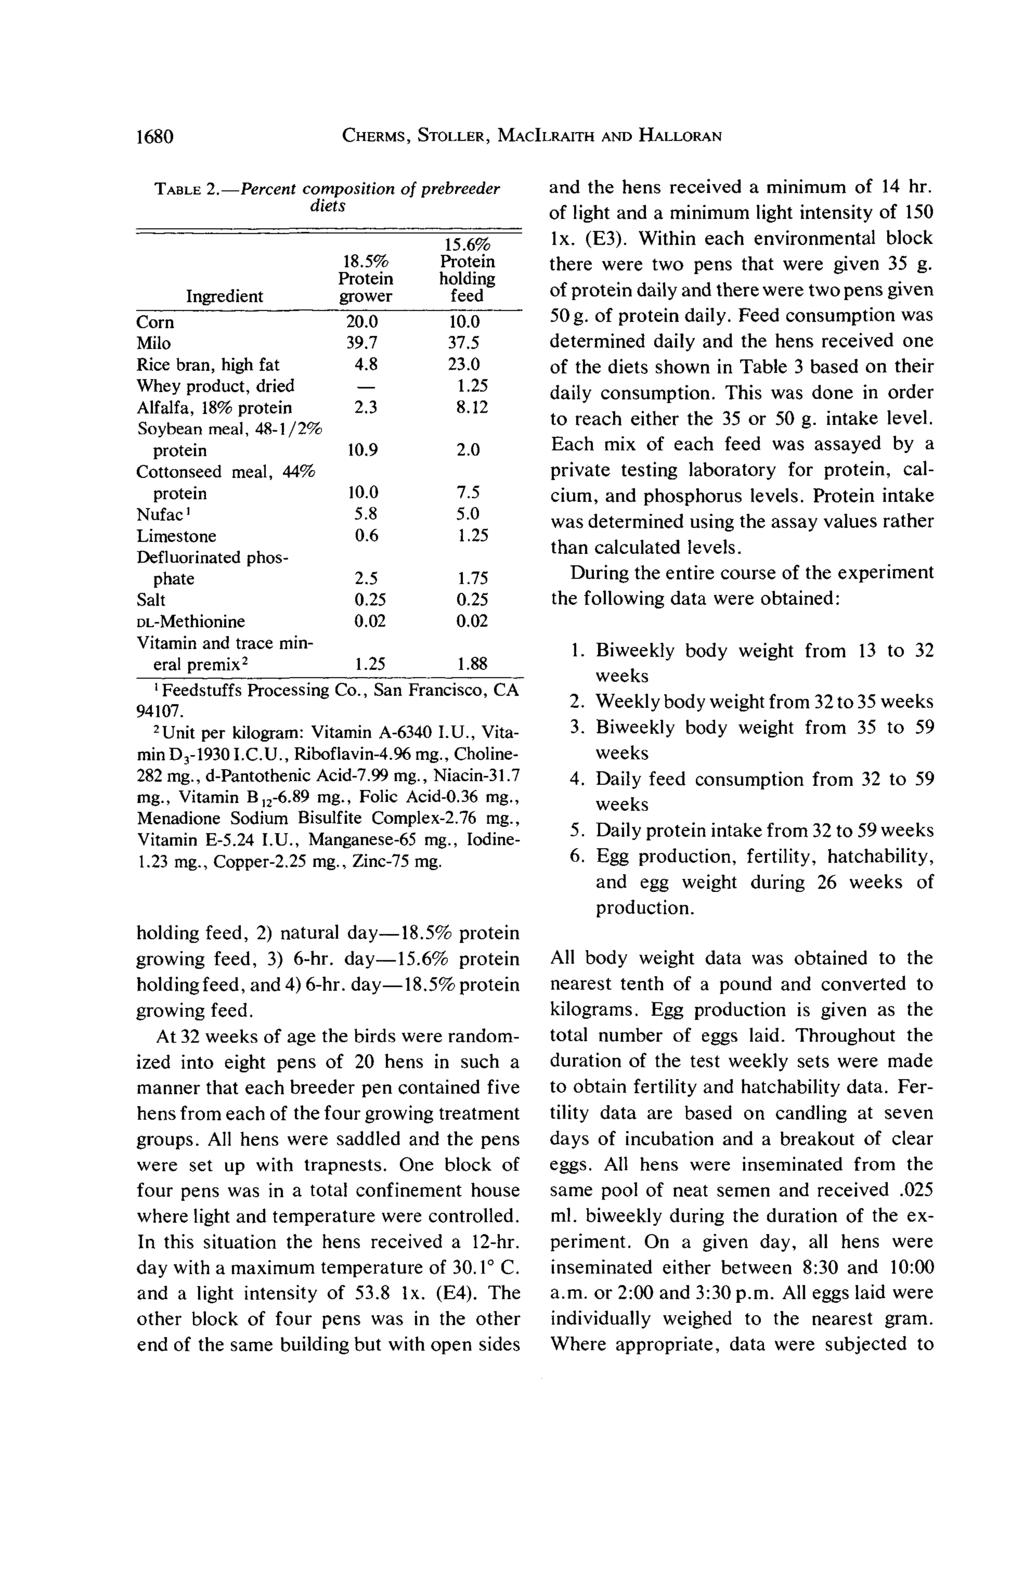 1680 CHERMS, STOLLER, MACILRAITH AND HALLORAN TABLE 2.Percent composition of prebreeder diets 15.6% 18.